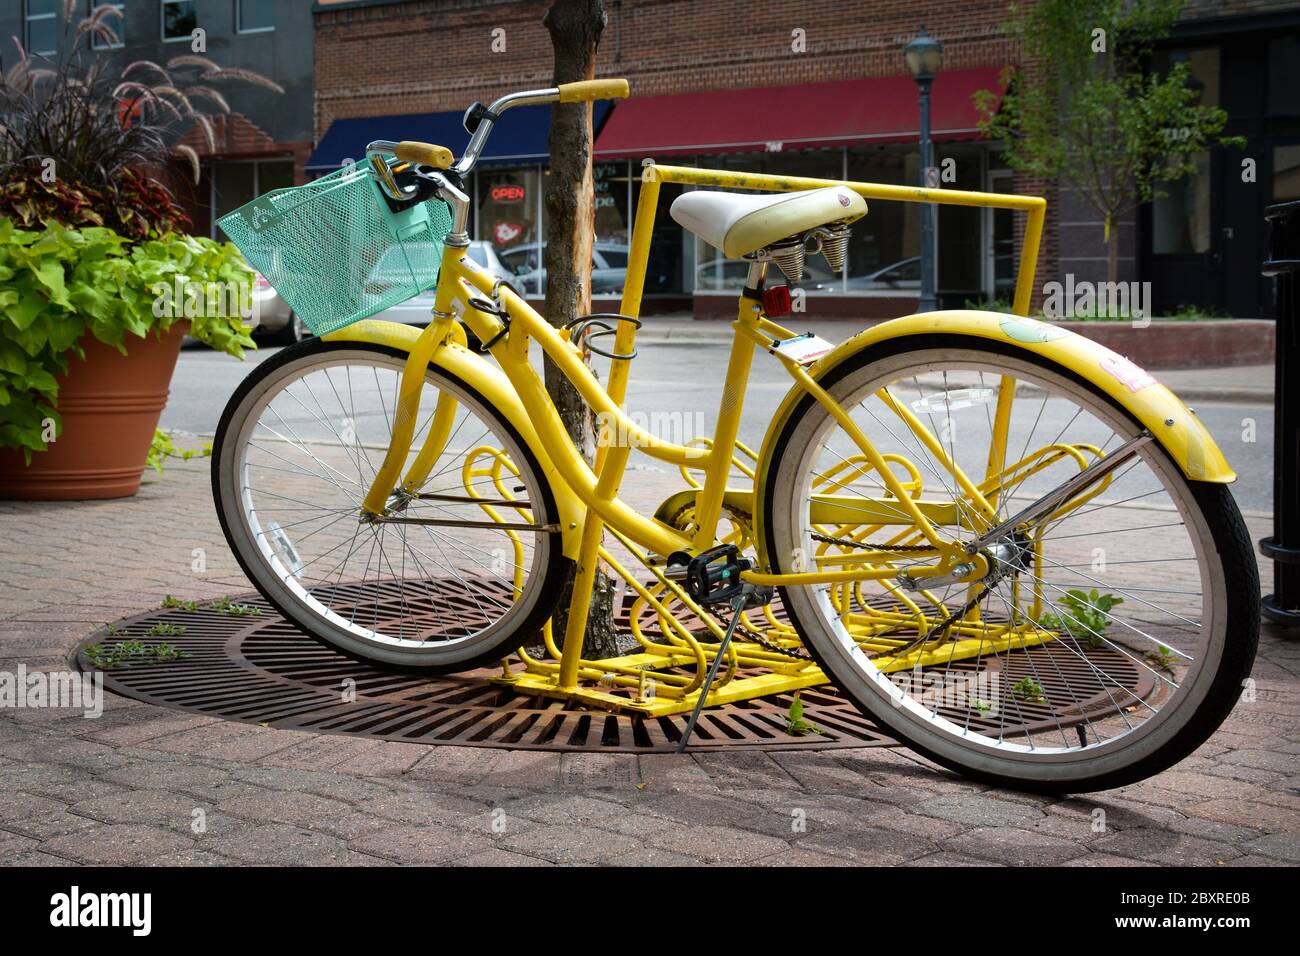 A parked retro style yellow girl's bicycle with teal green basket on front locked to a tree in  revitalized downtown in St. Cloud, MN, USA Stock Photo